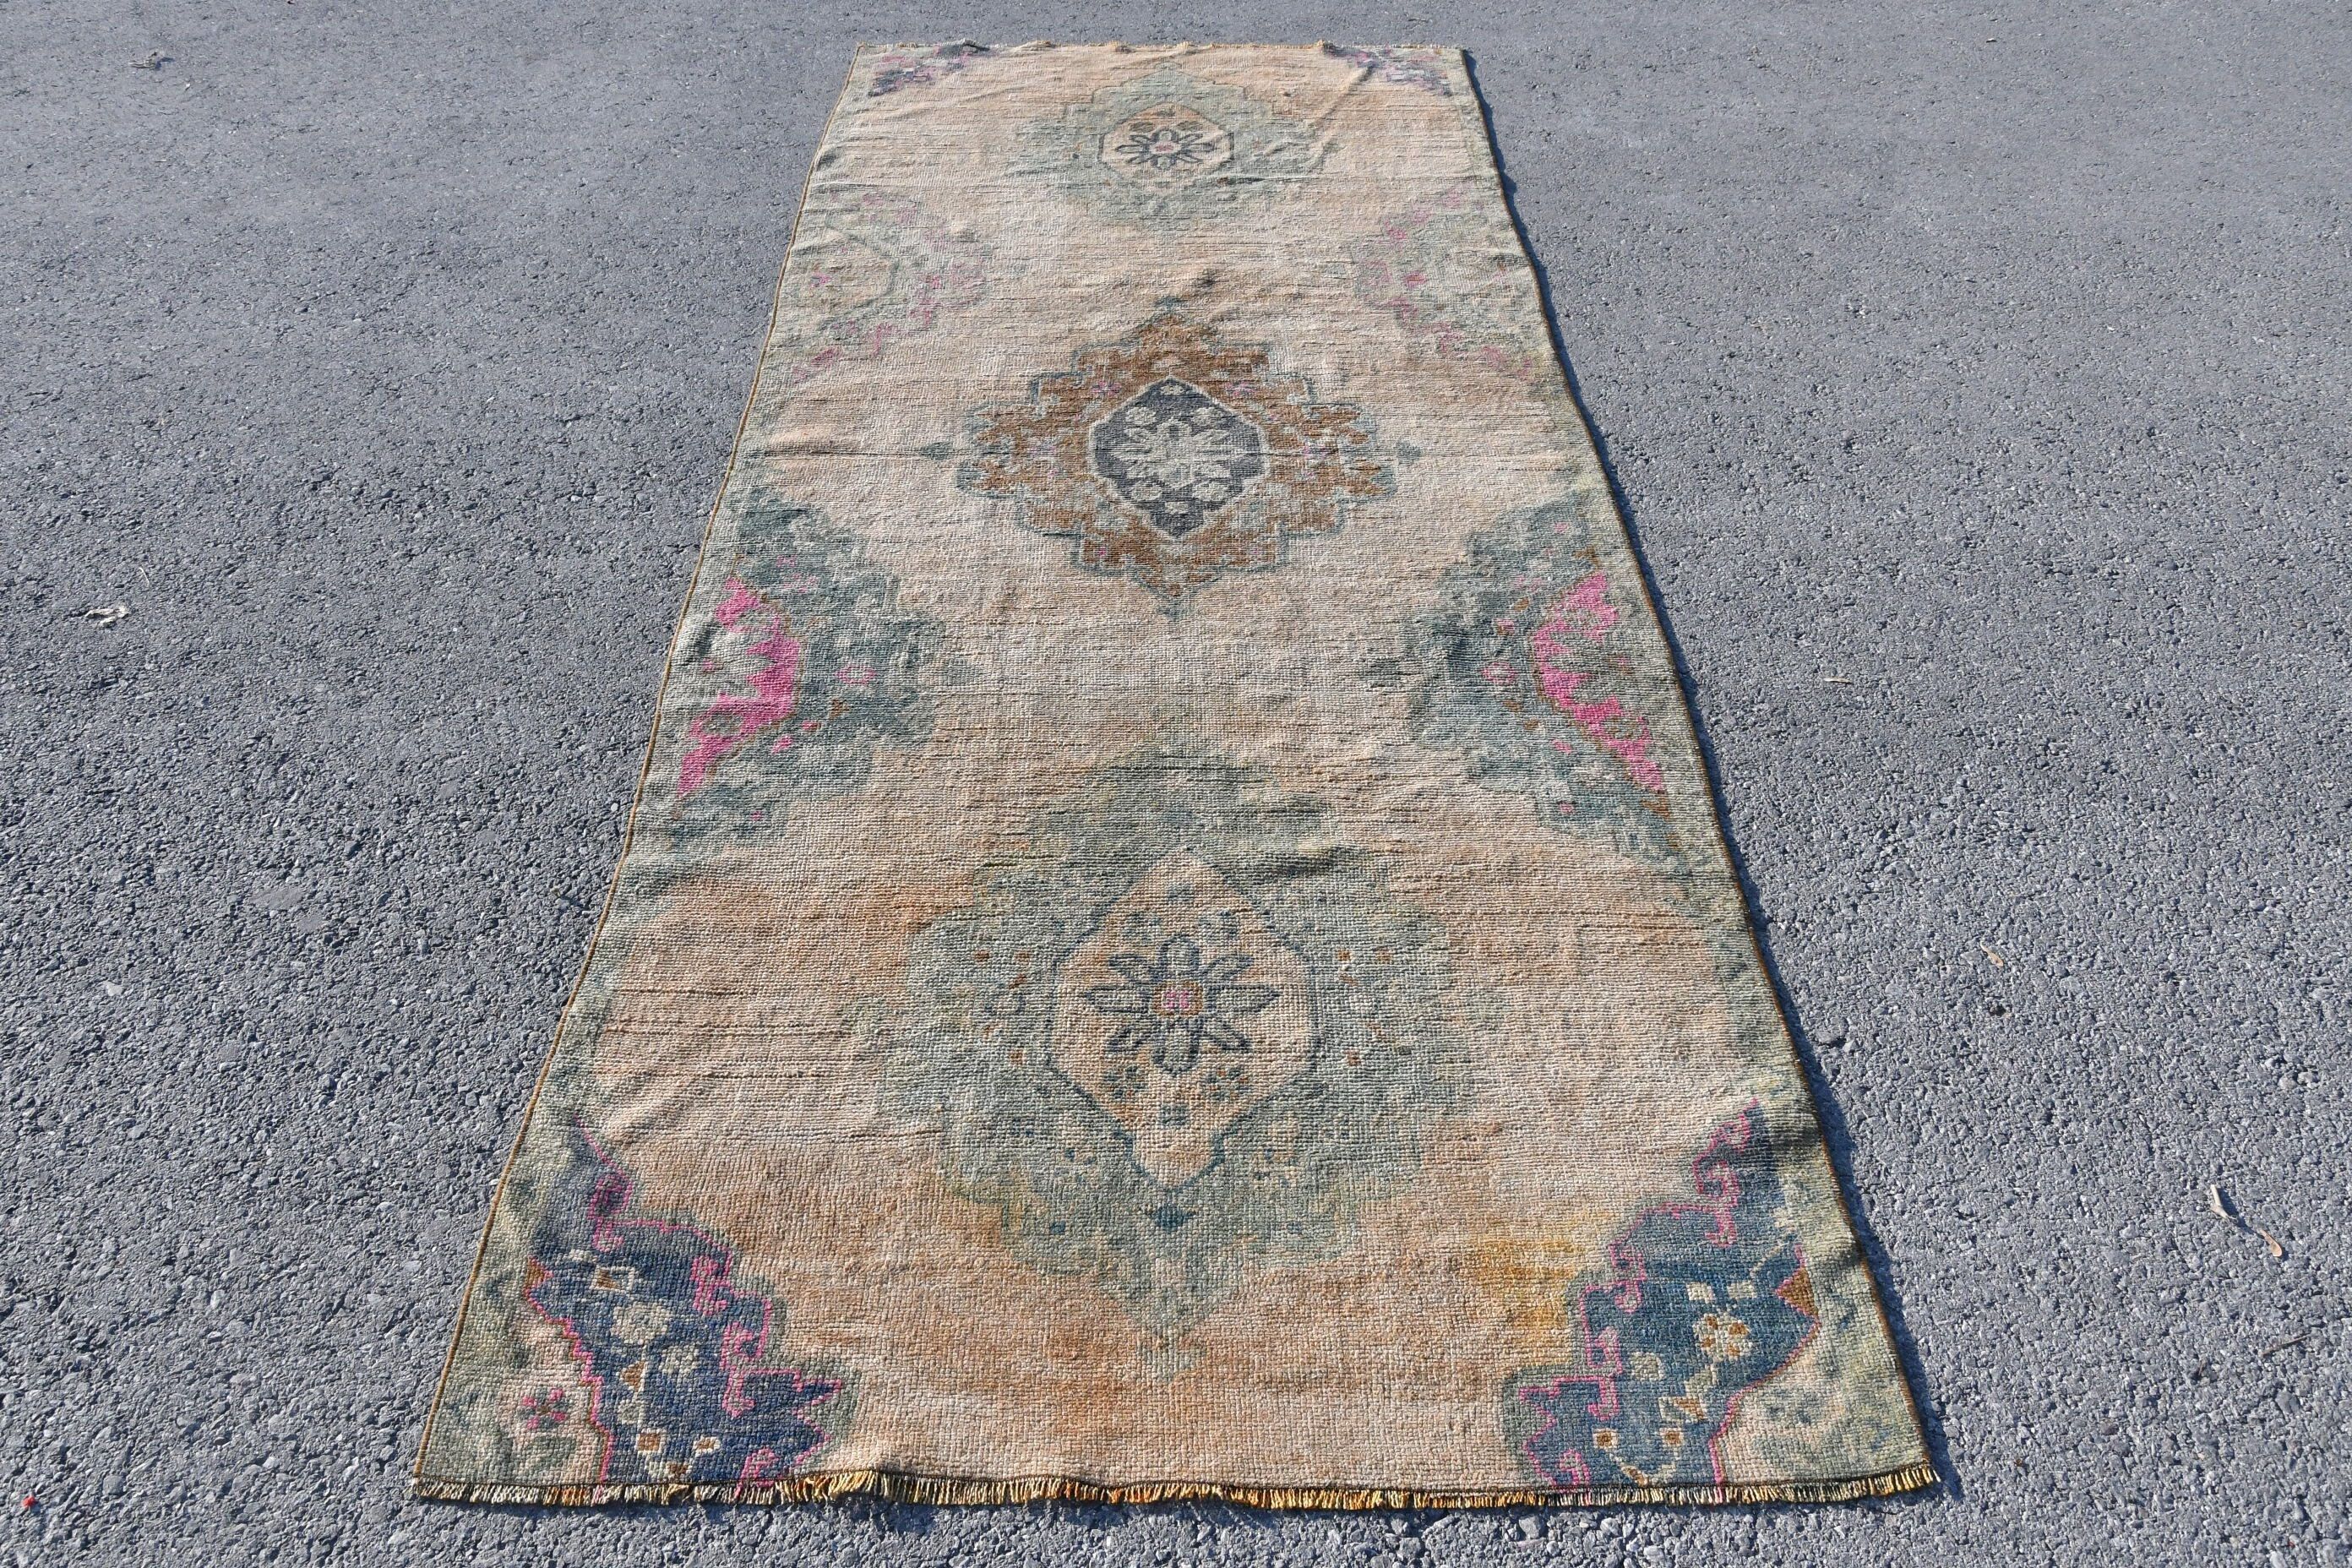 Wool Rugs, Vintage Rug, 4.1x10.1 ft Large Rug, Rugs for Salon, Turkish Rugs, Eclectic Rug, Antique Rug, Salon Rugs, Dining Room Rugs